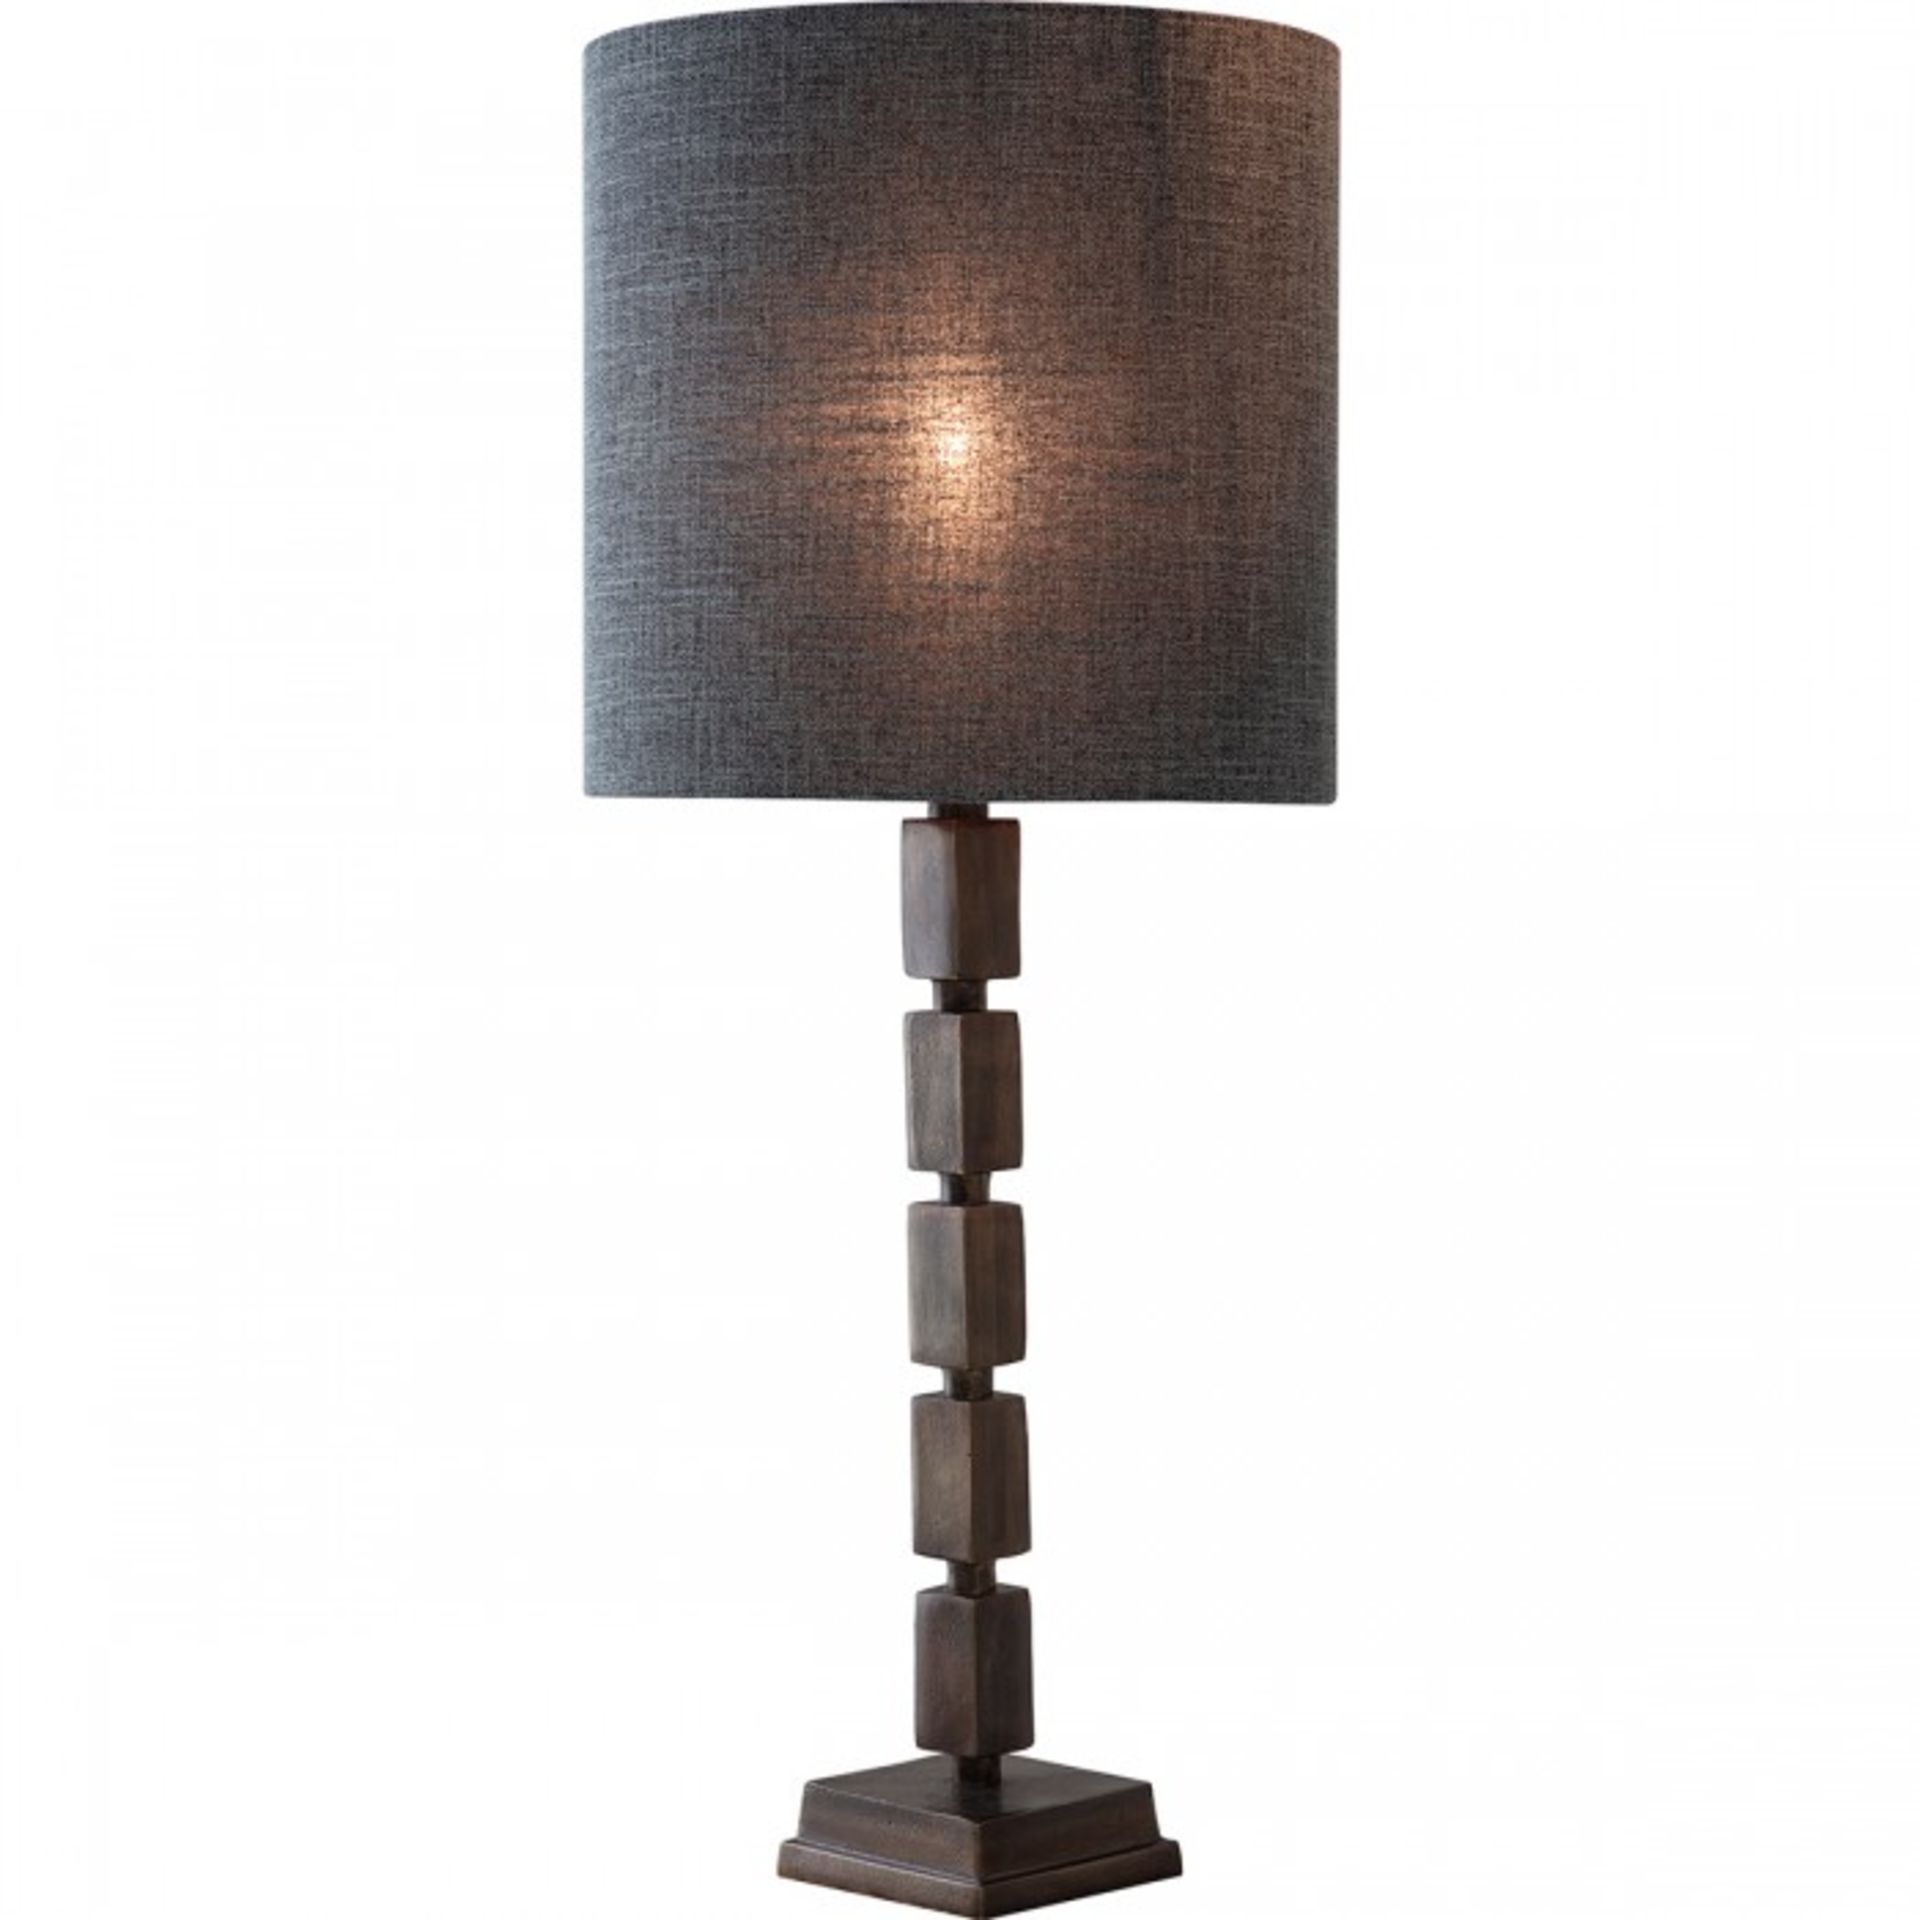 Hannagan Table Lamp Base Only ight up any room in your home with this chic & stylish table - Image 2 of 3